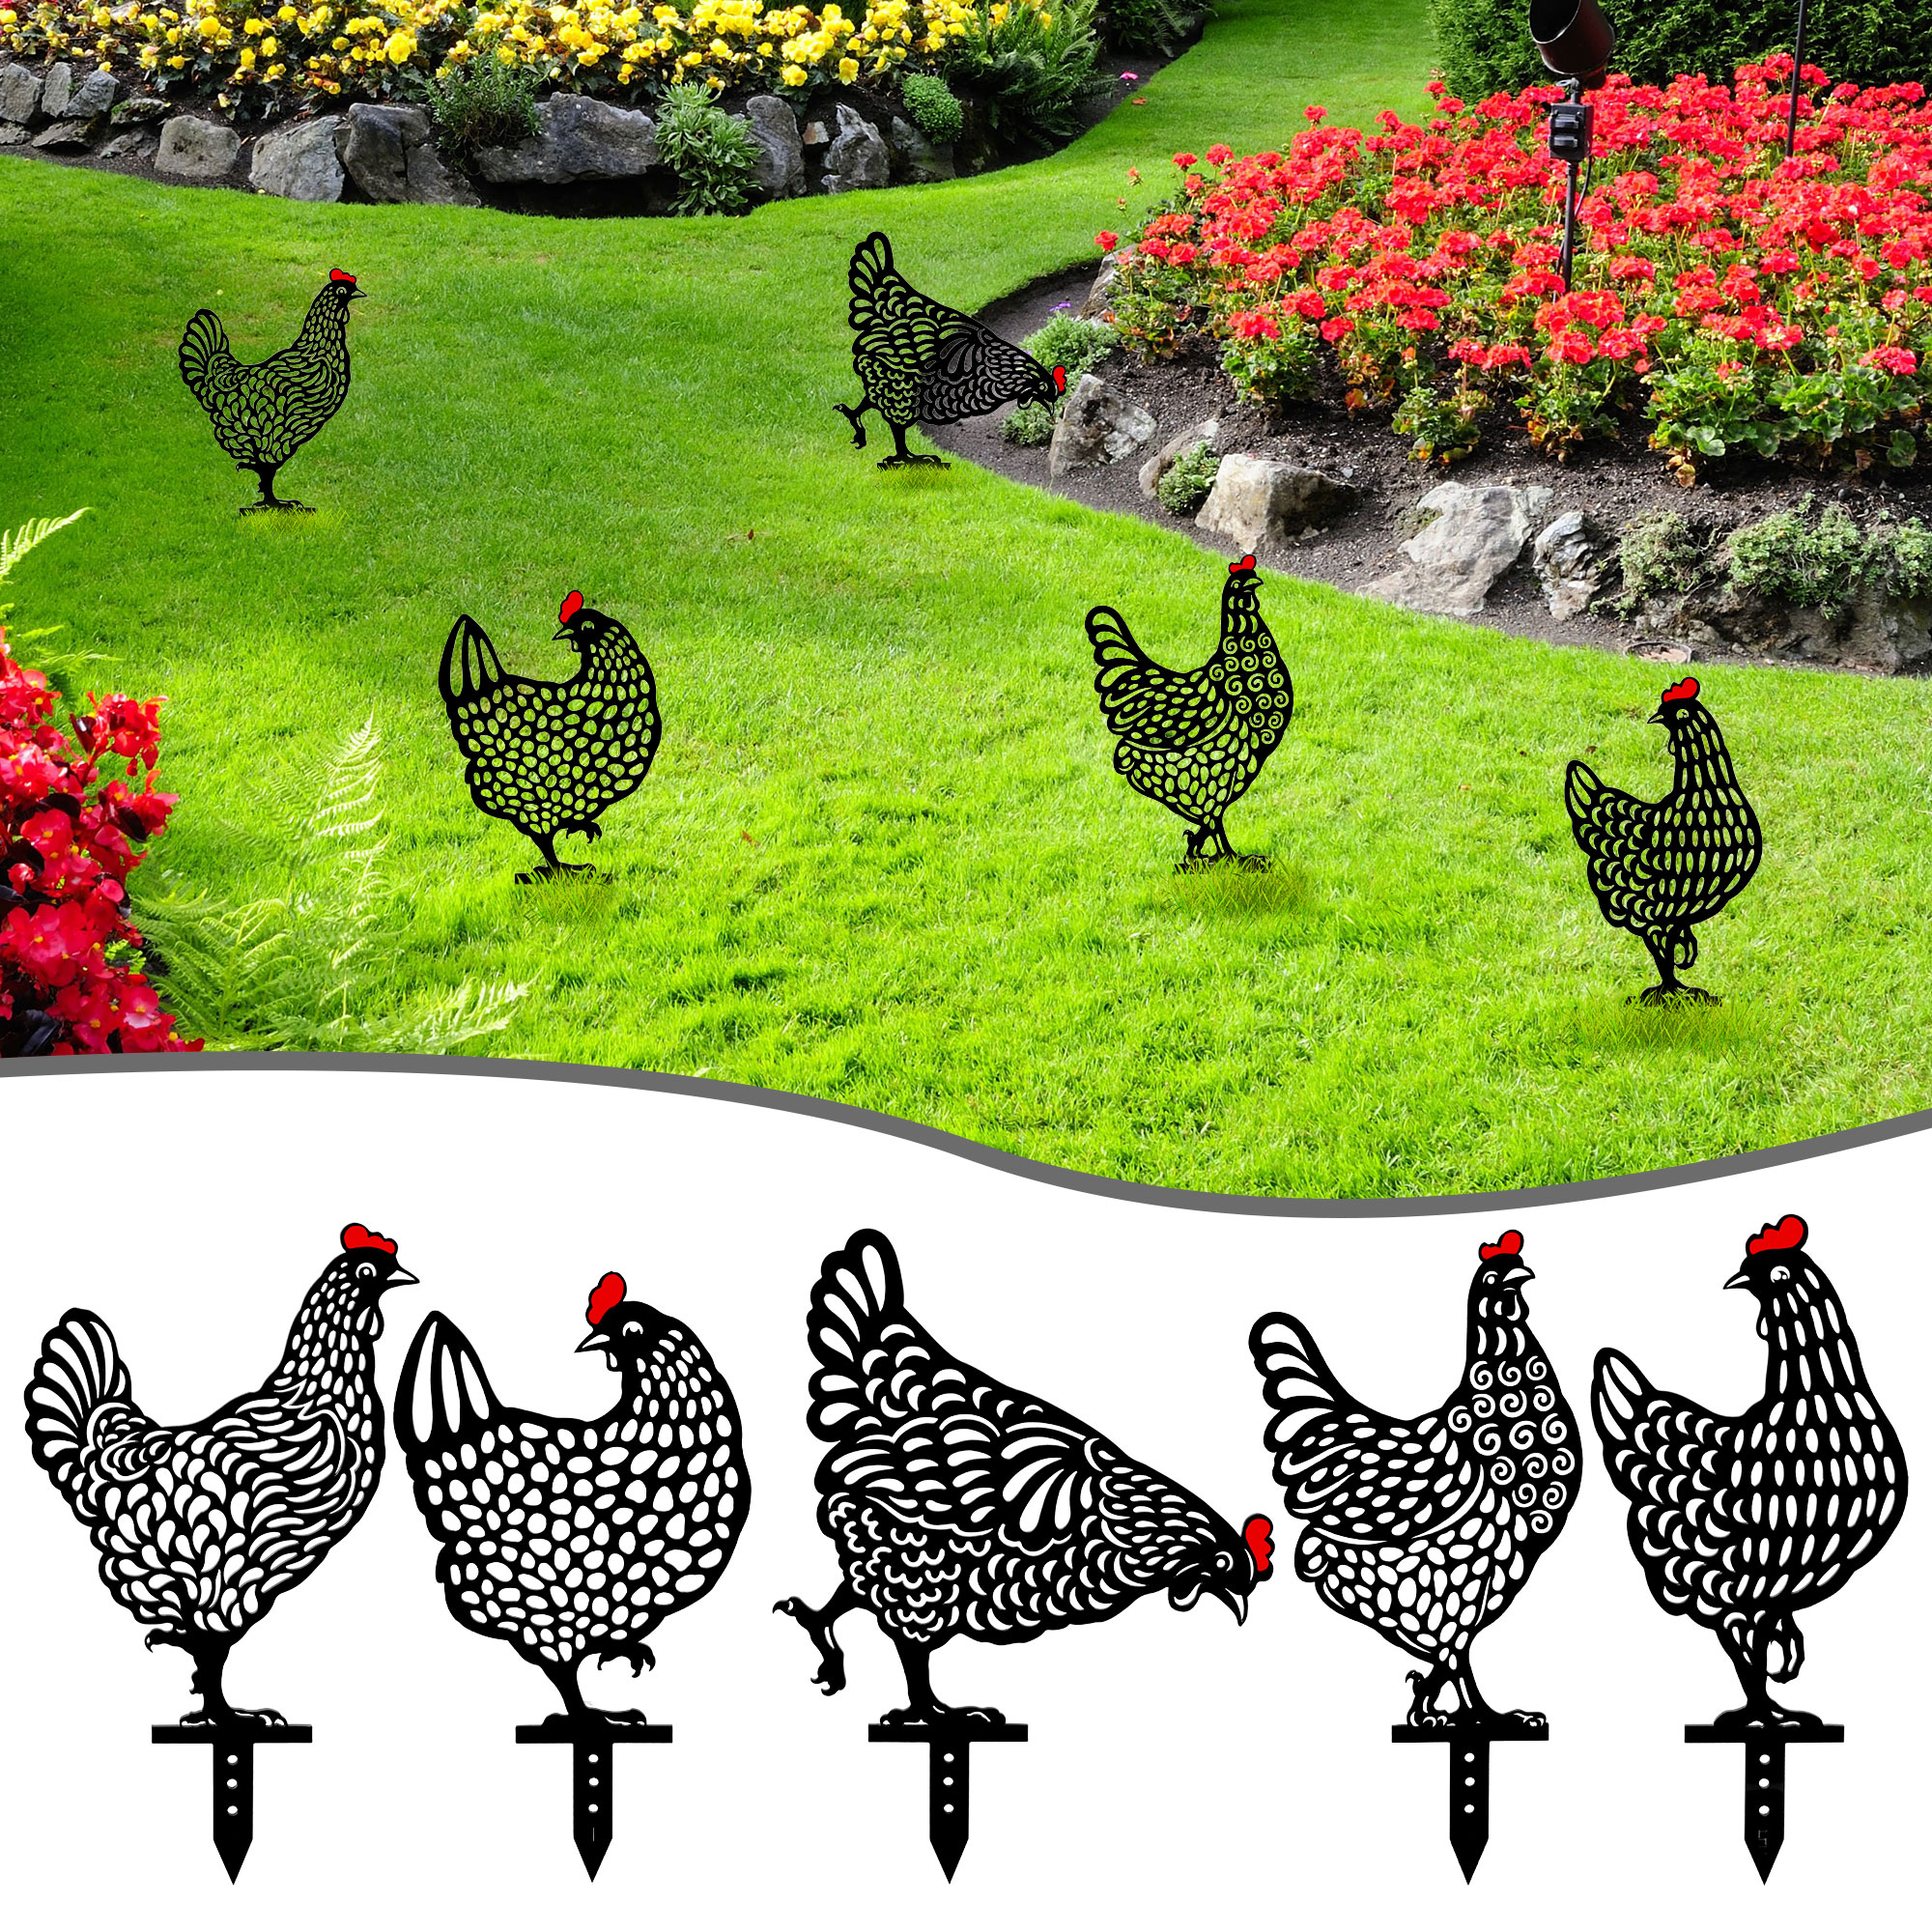 EEEkit 5pcs Garden Rooster Decorative Stakes, Chicken Silhouette Art Hollow Out Animal Shape Decors for Outdoor, Black - image 1 of 5